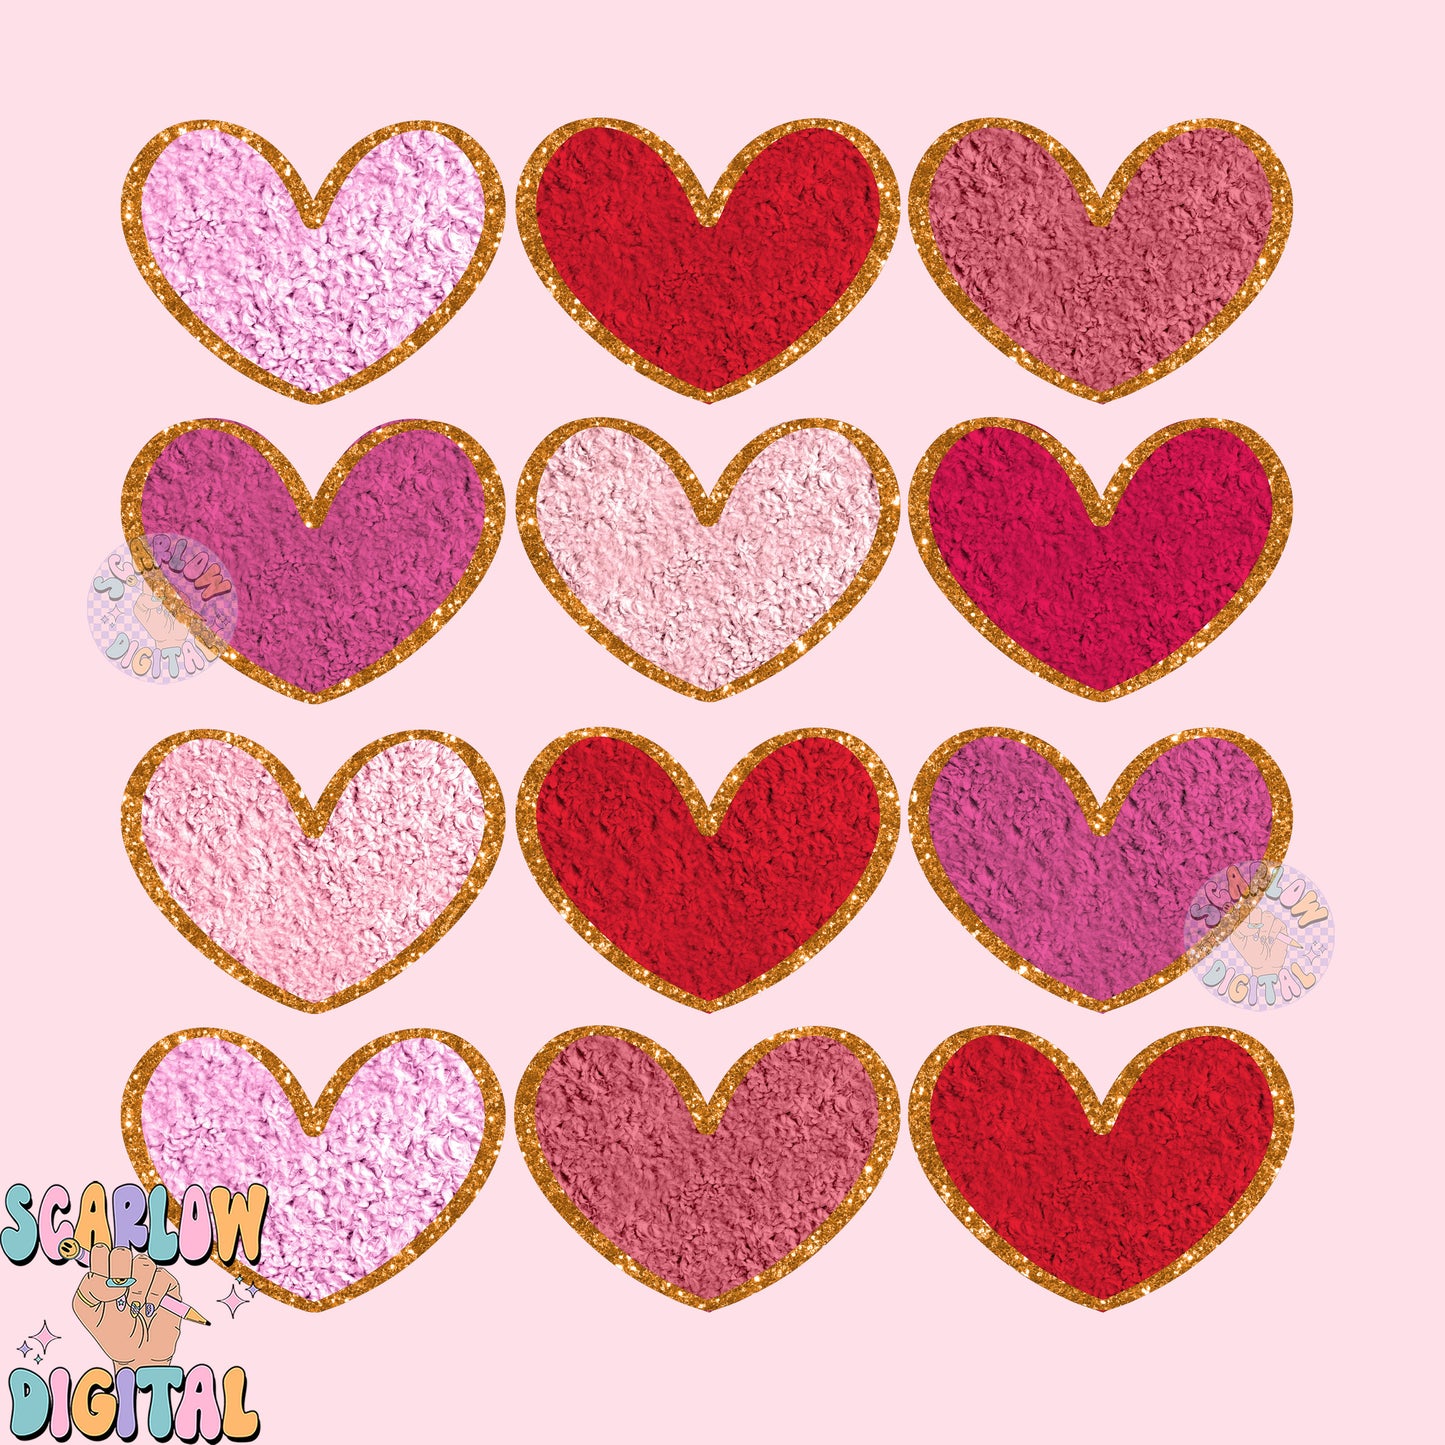 Mama Faux Chenille PNG Bundle-Valentine's Day Digital Design Download-mama sleeve png, fake chenille letters png, valentine's day mama png